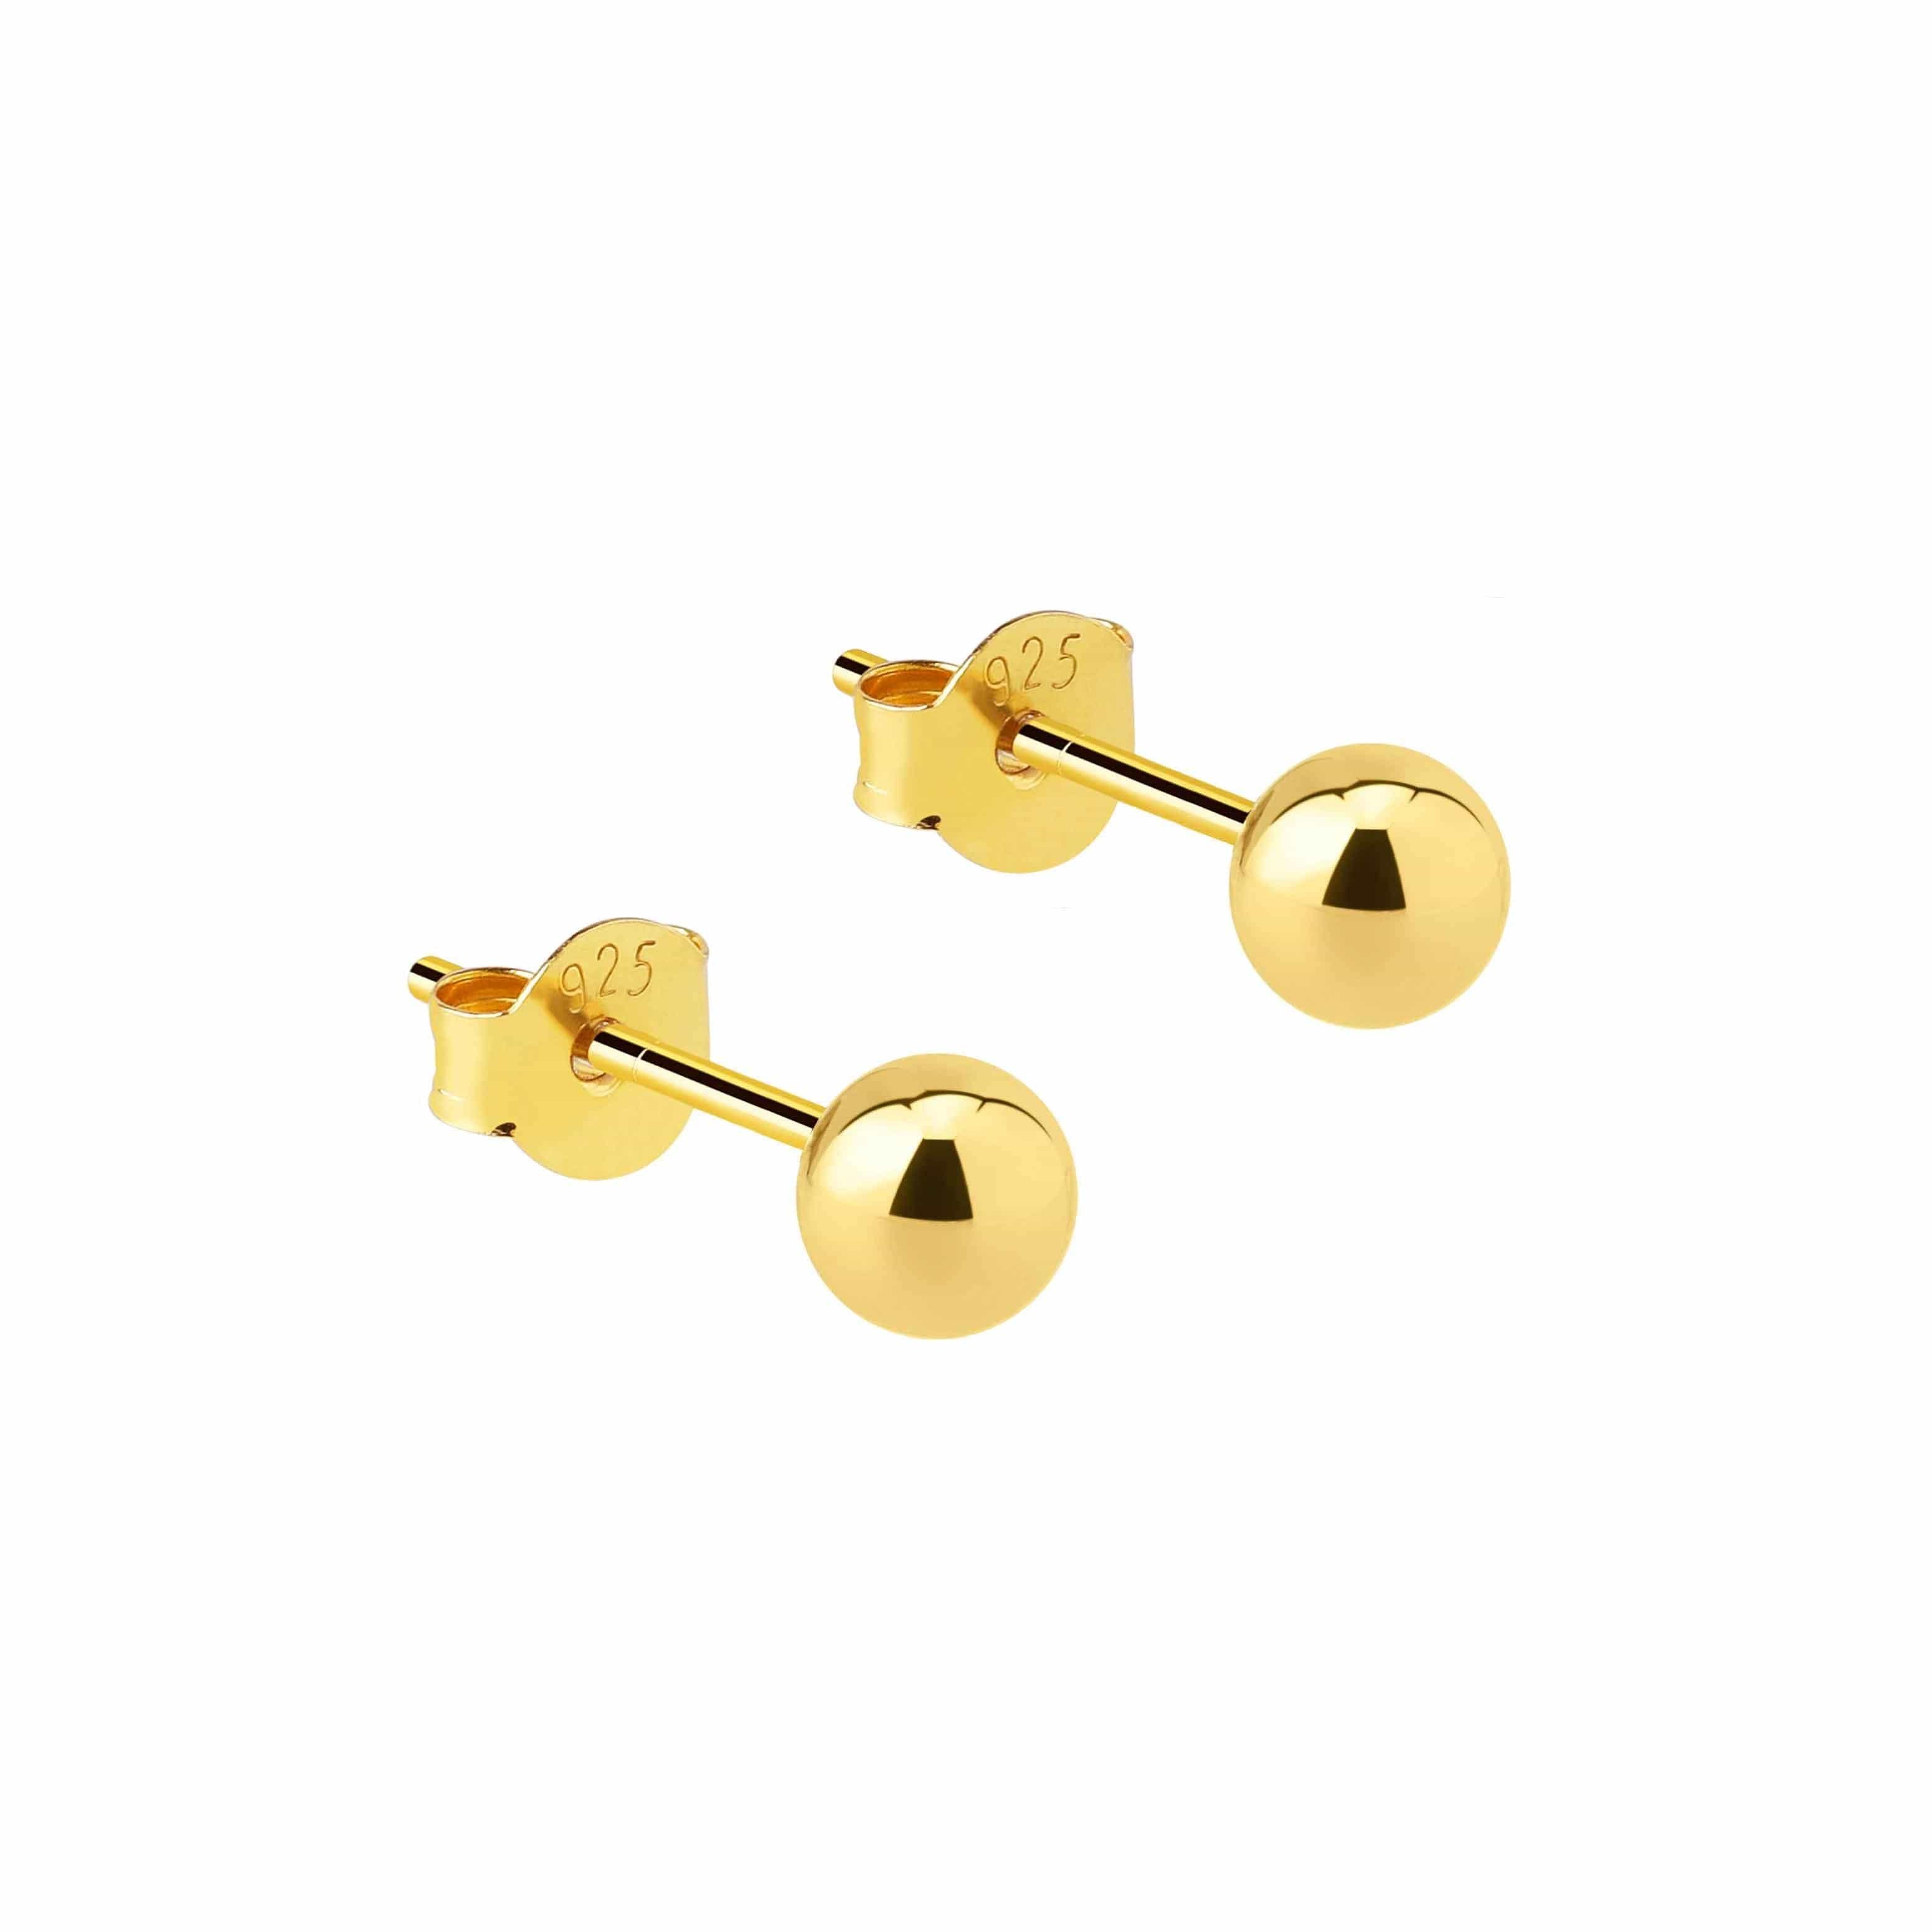 4mm classic stud earring gold plated